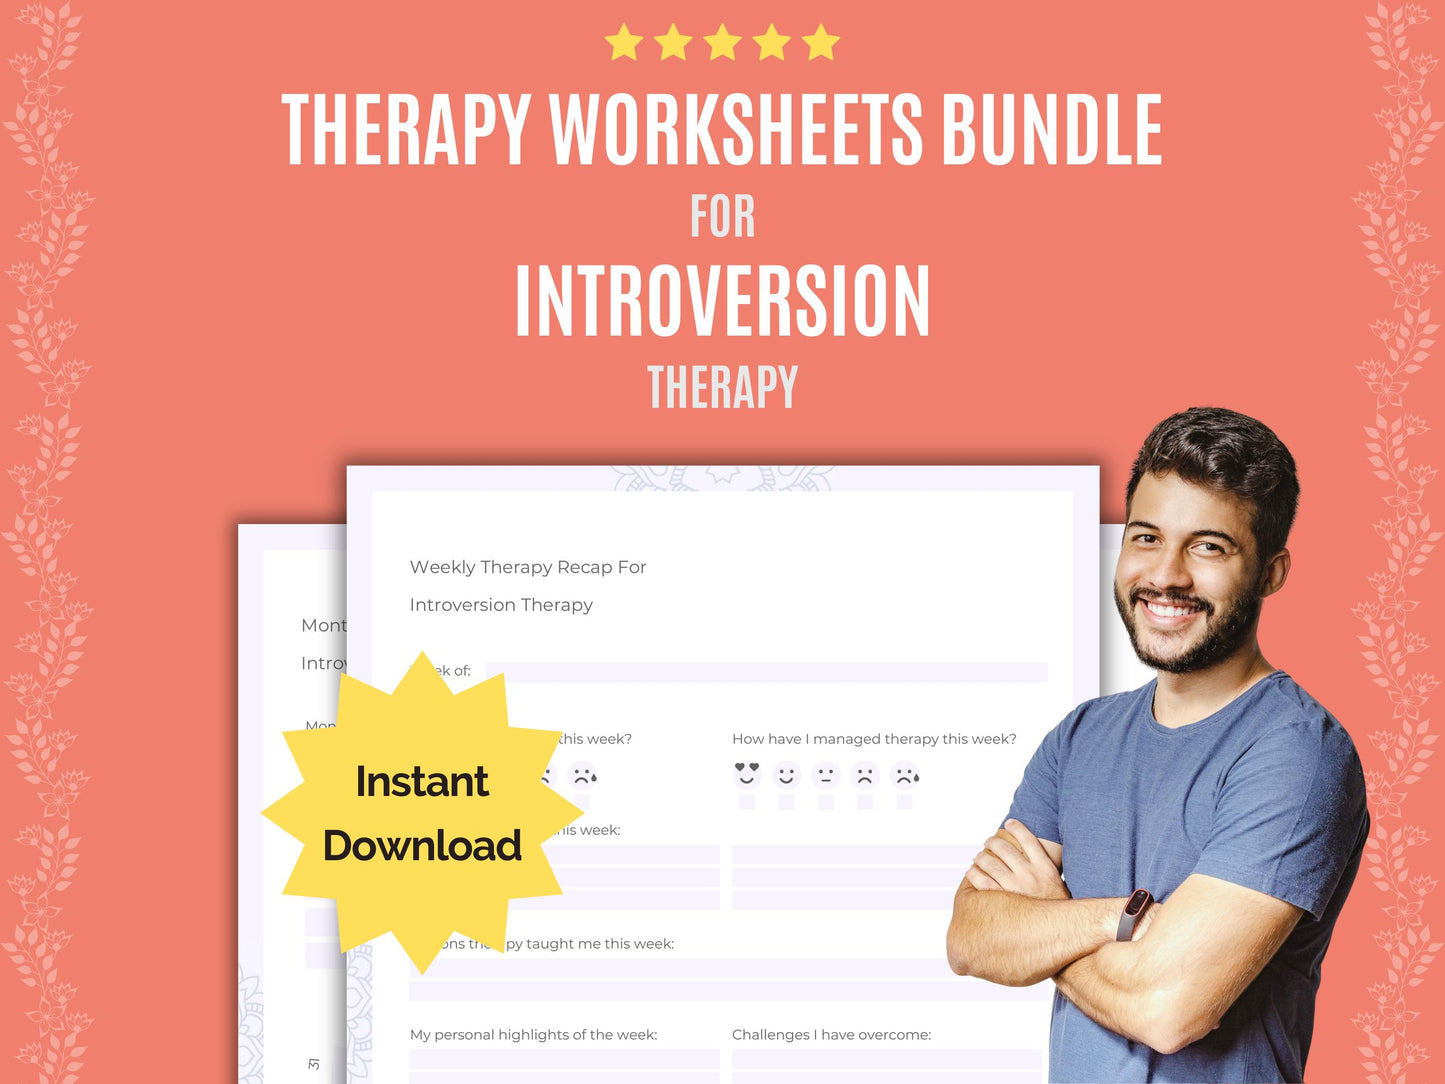 Introverts Resources, Journaling, Introverts Journals, Introverts Templates, Goal Setting, Introverts Planners, Introverts Workbooks, Counseling, Introverts Therapy, Introverts Notes, Cheat Sheet, Introverts Tools